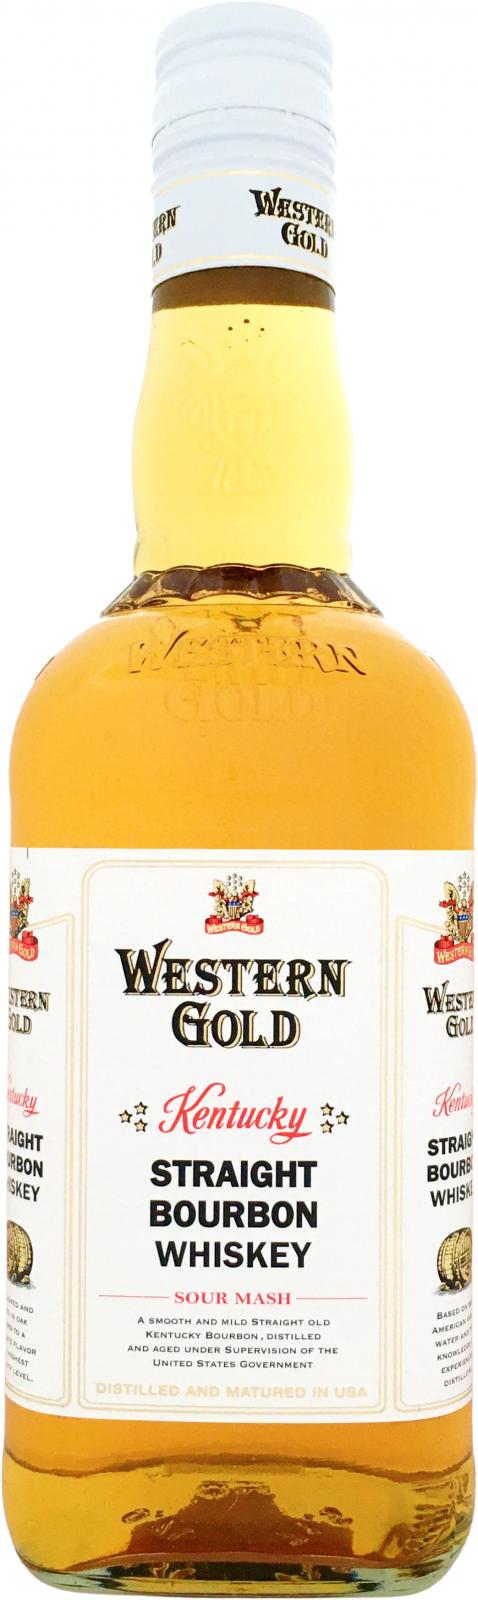 Kentucky Gold and Old Whiskybase reviews - Ratings Western Bourbon - Straight Whiskey